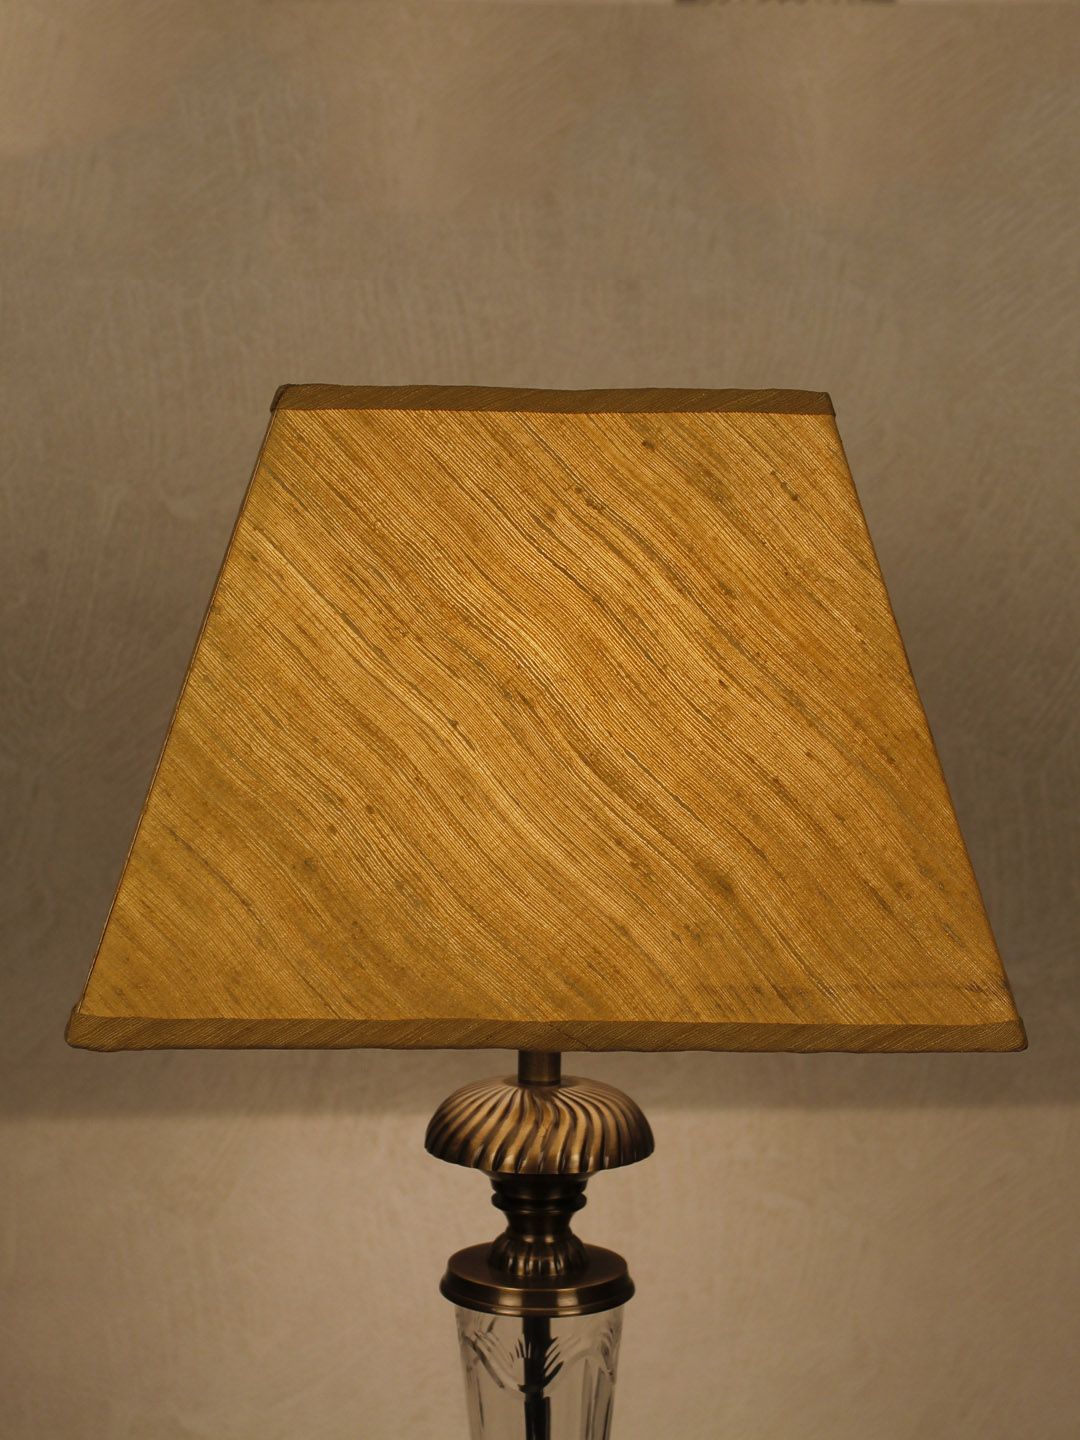 THE LIGHT STORE Beige Self-Design Contemporary Table Top Lamp Shade Price in India